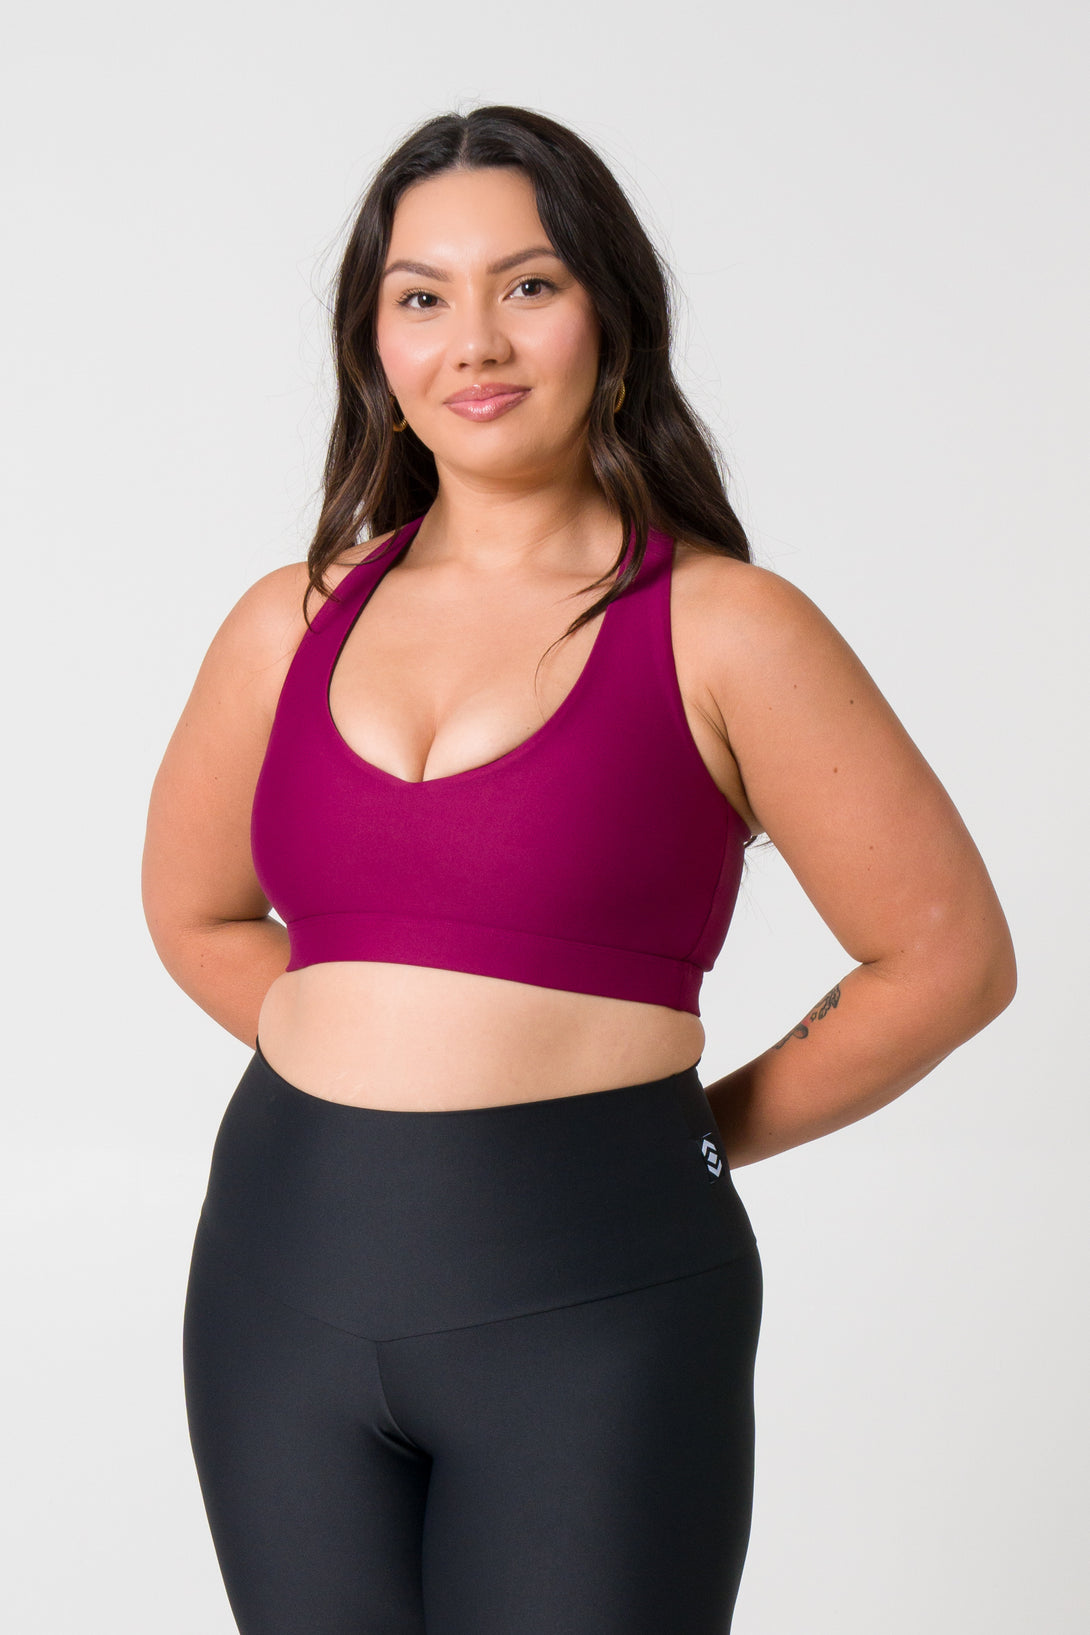 ExoticAthletica Women's Activewear Berry Performance Deep V Crop - Stylish and supportive activewear for women, featuring a deep V neckline and vibrant berry color. Perfect for workouts or casual wear.